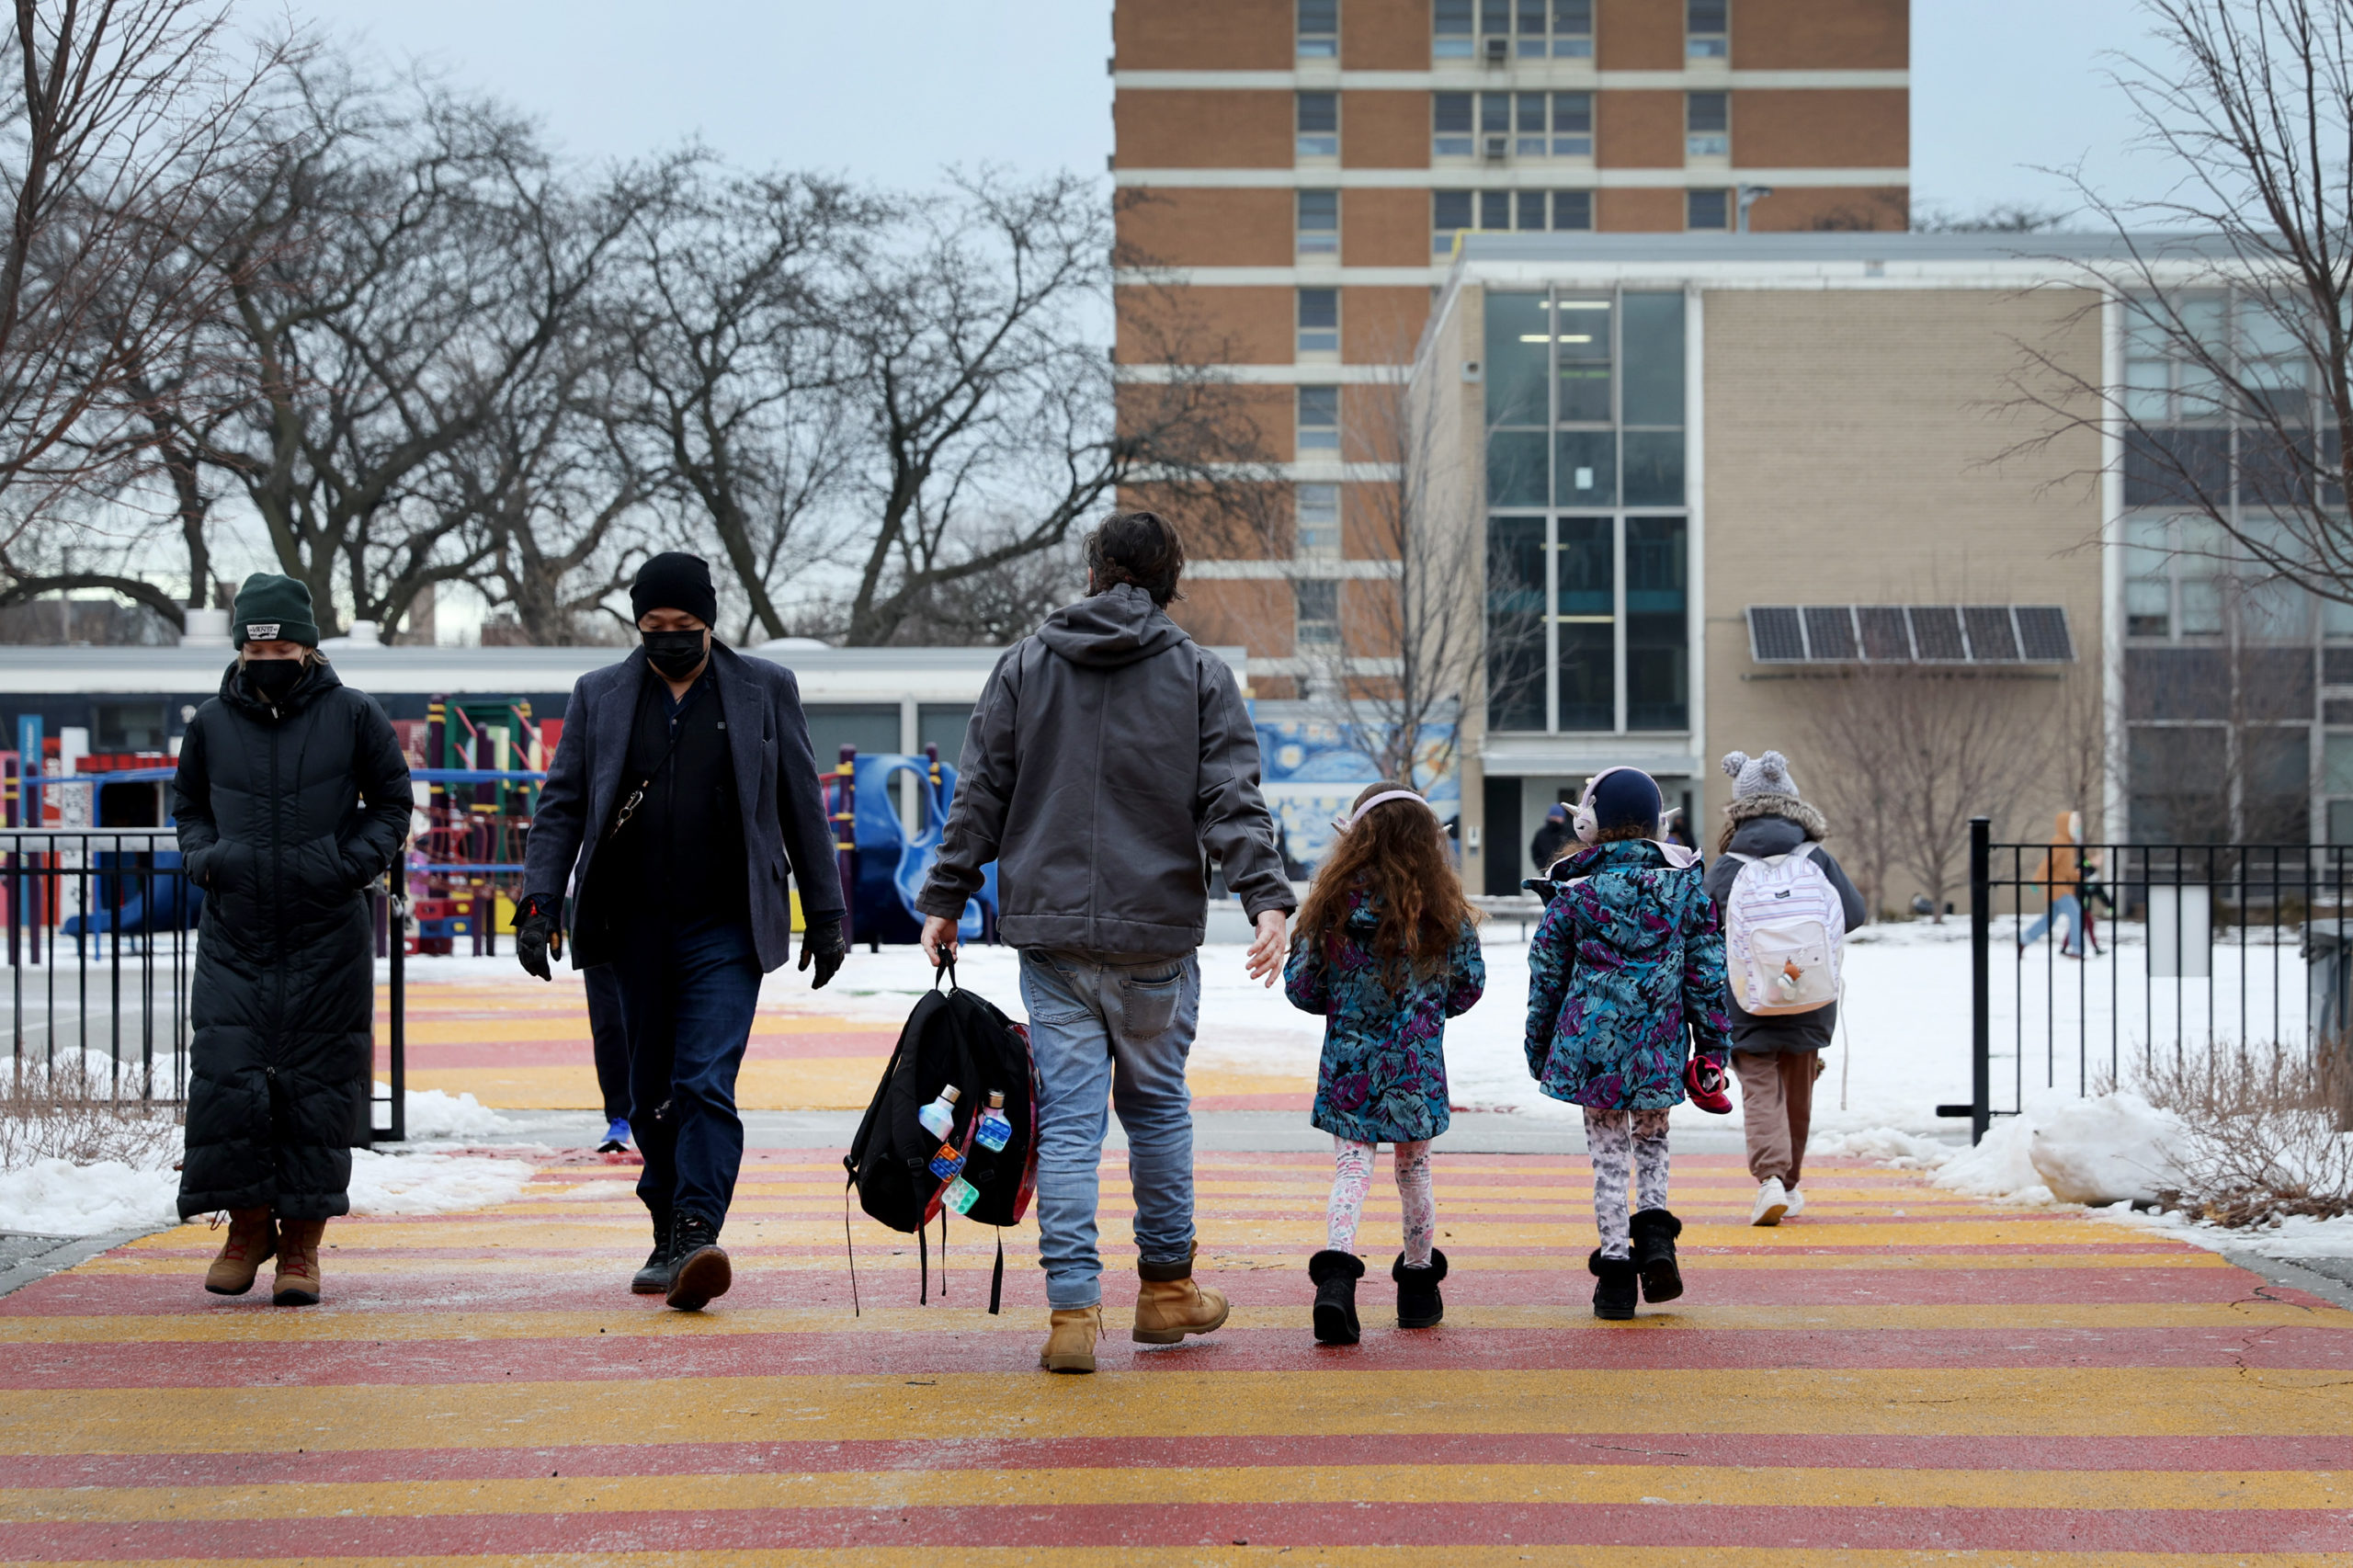 Students arrive for classes at A. N. Pritzker elementary school on January 12, 2022 in Chicago, Illinois. Students in Chicago public schools are returning to school today after classes were canceled for the past six days as the city sparred with the teacher's union over COVID-19 safety measures. (Photo by Scott Olson/Getty Images)